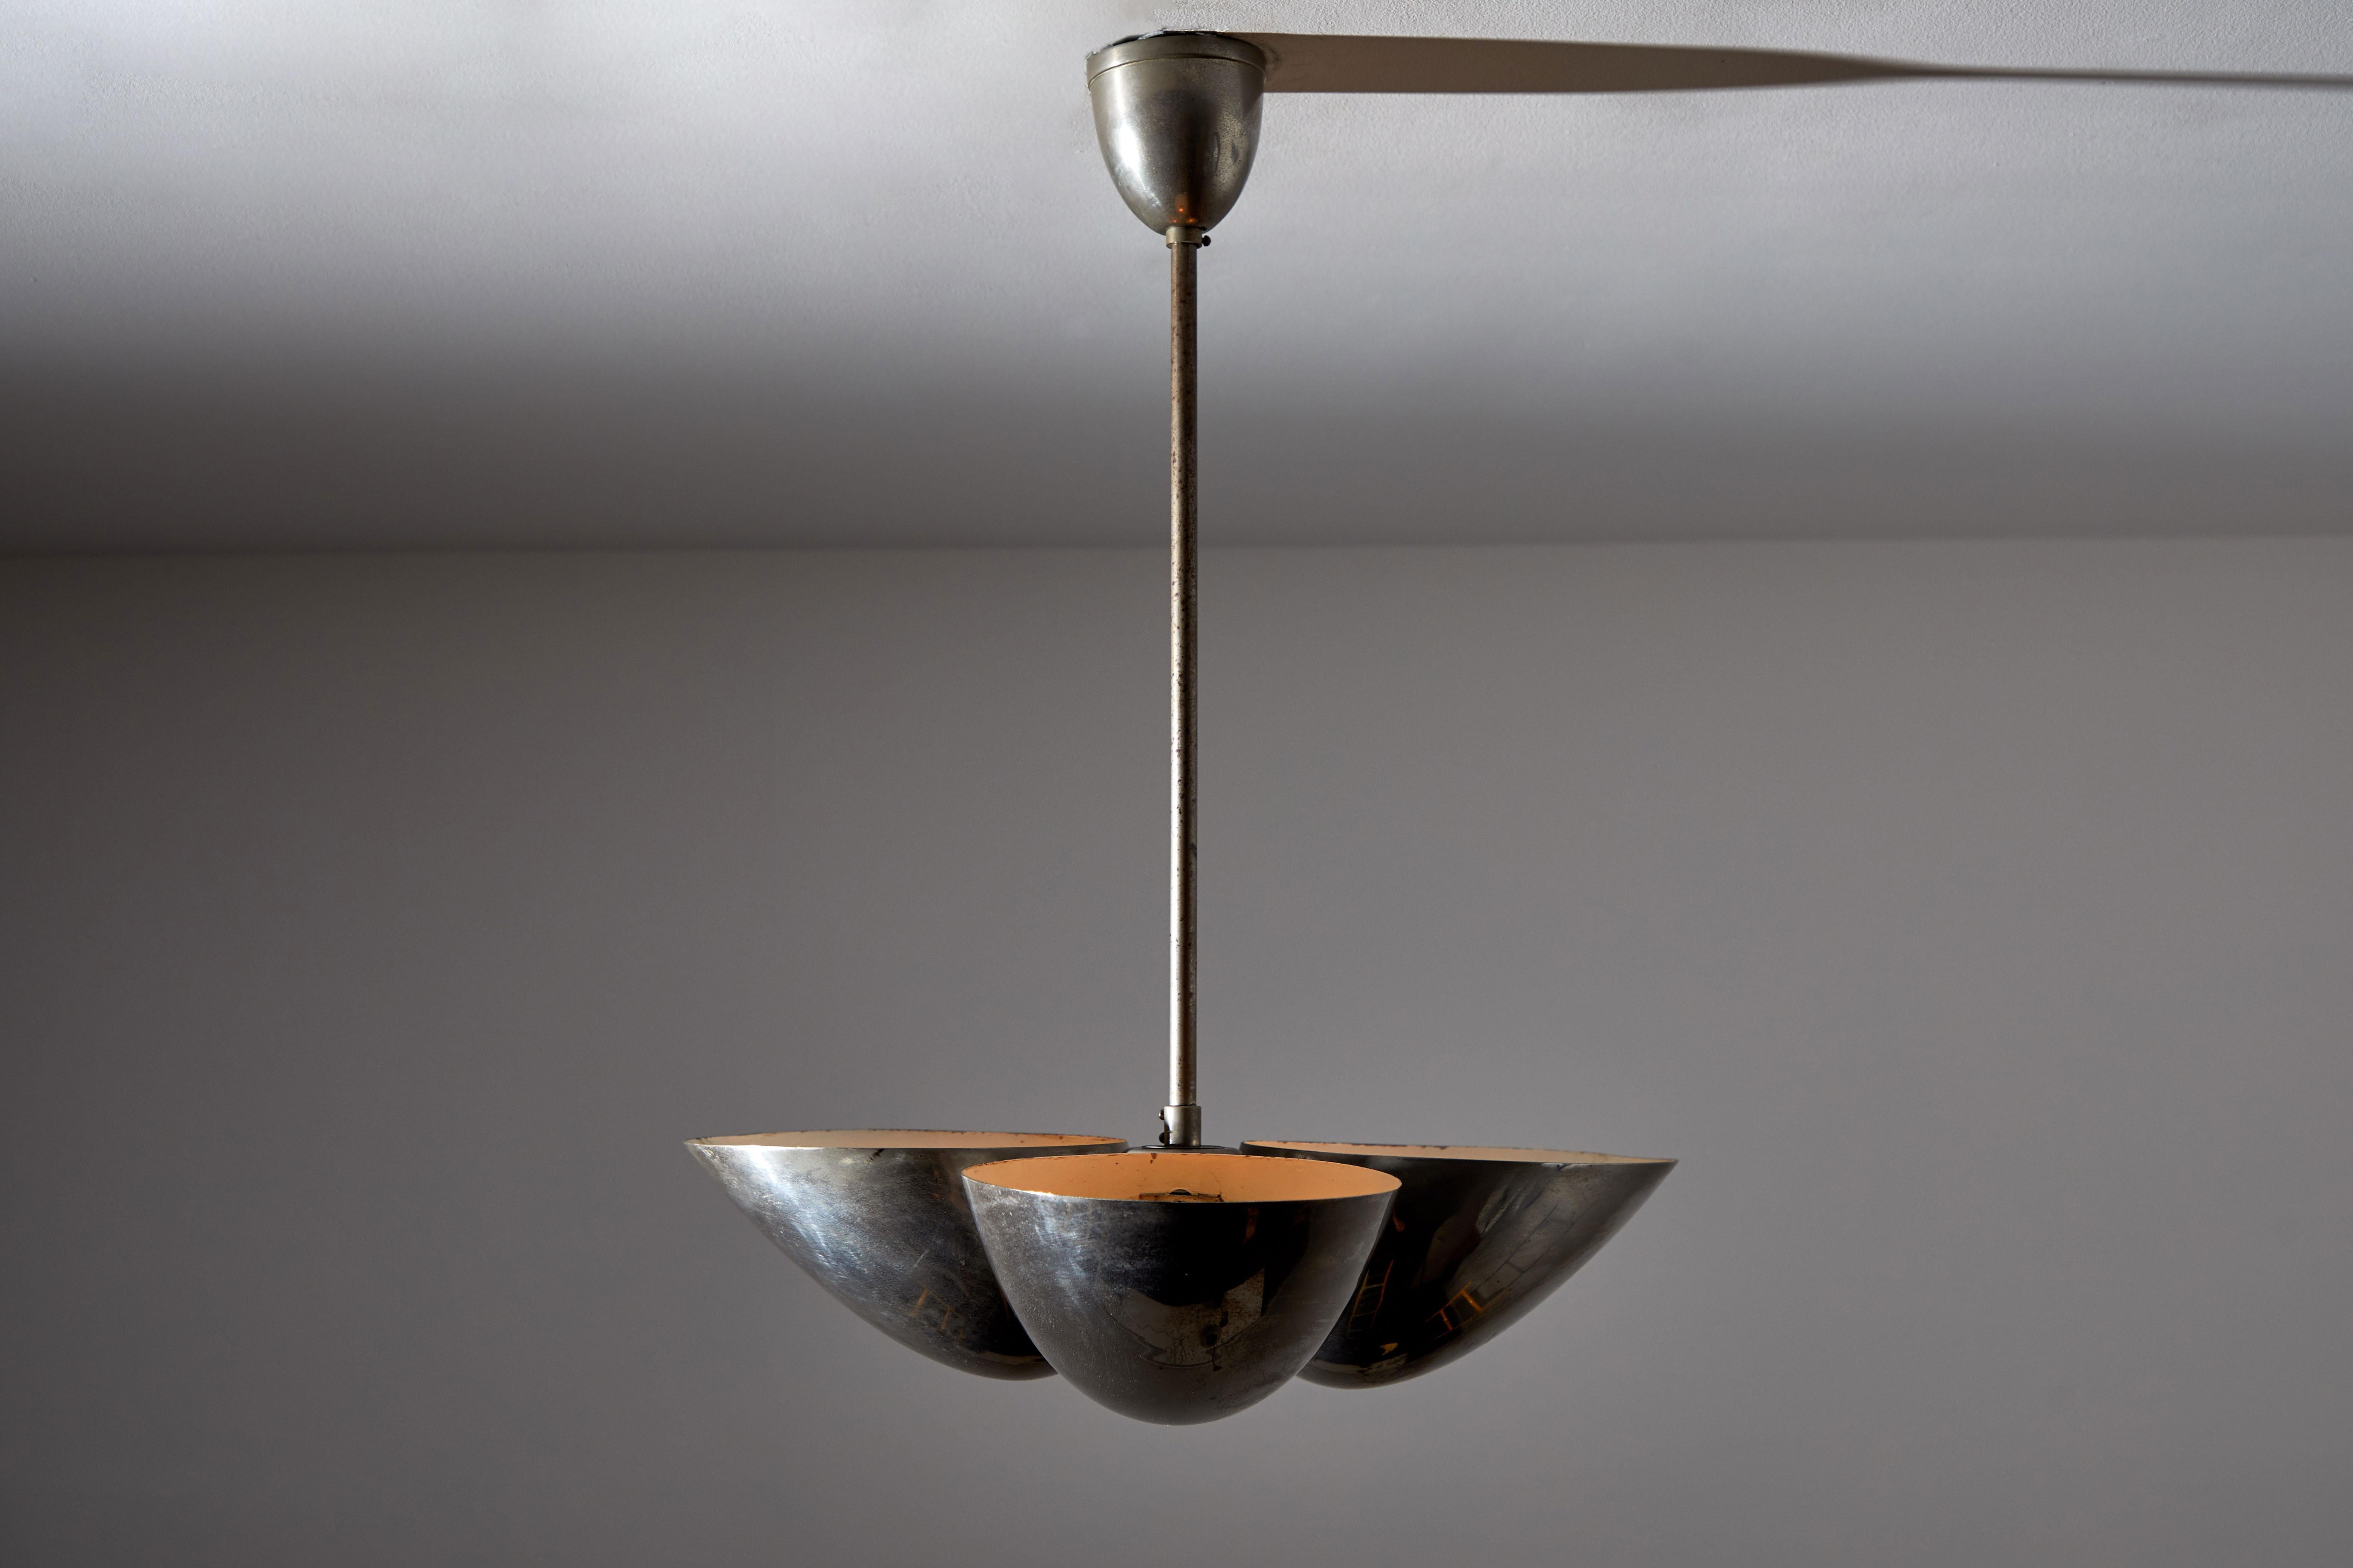 Three-shade Bauhaus chandelier by Zukov. Manufactured in Czech republic circa 1930s. Nickel plated brass. Original canopy. Rewired for US junction boxes. Takes three E27 60w maximum bulbs. Bulbs included as a one time courtesy.